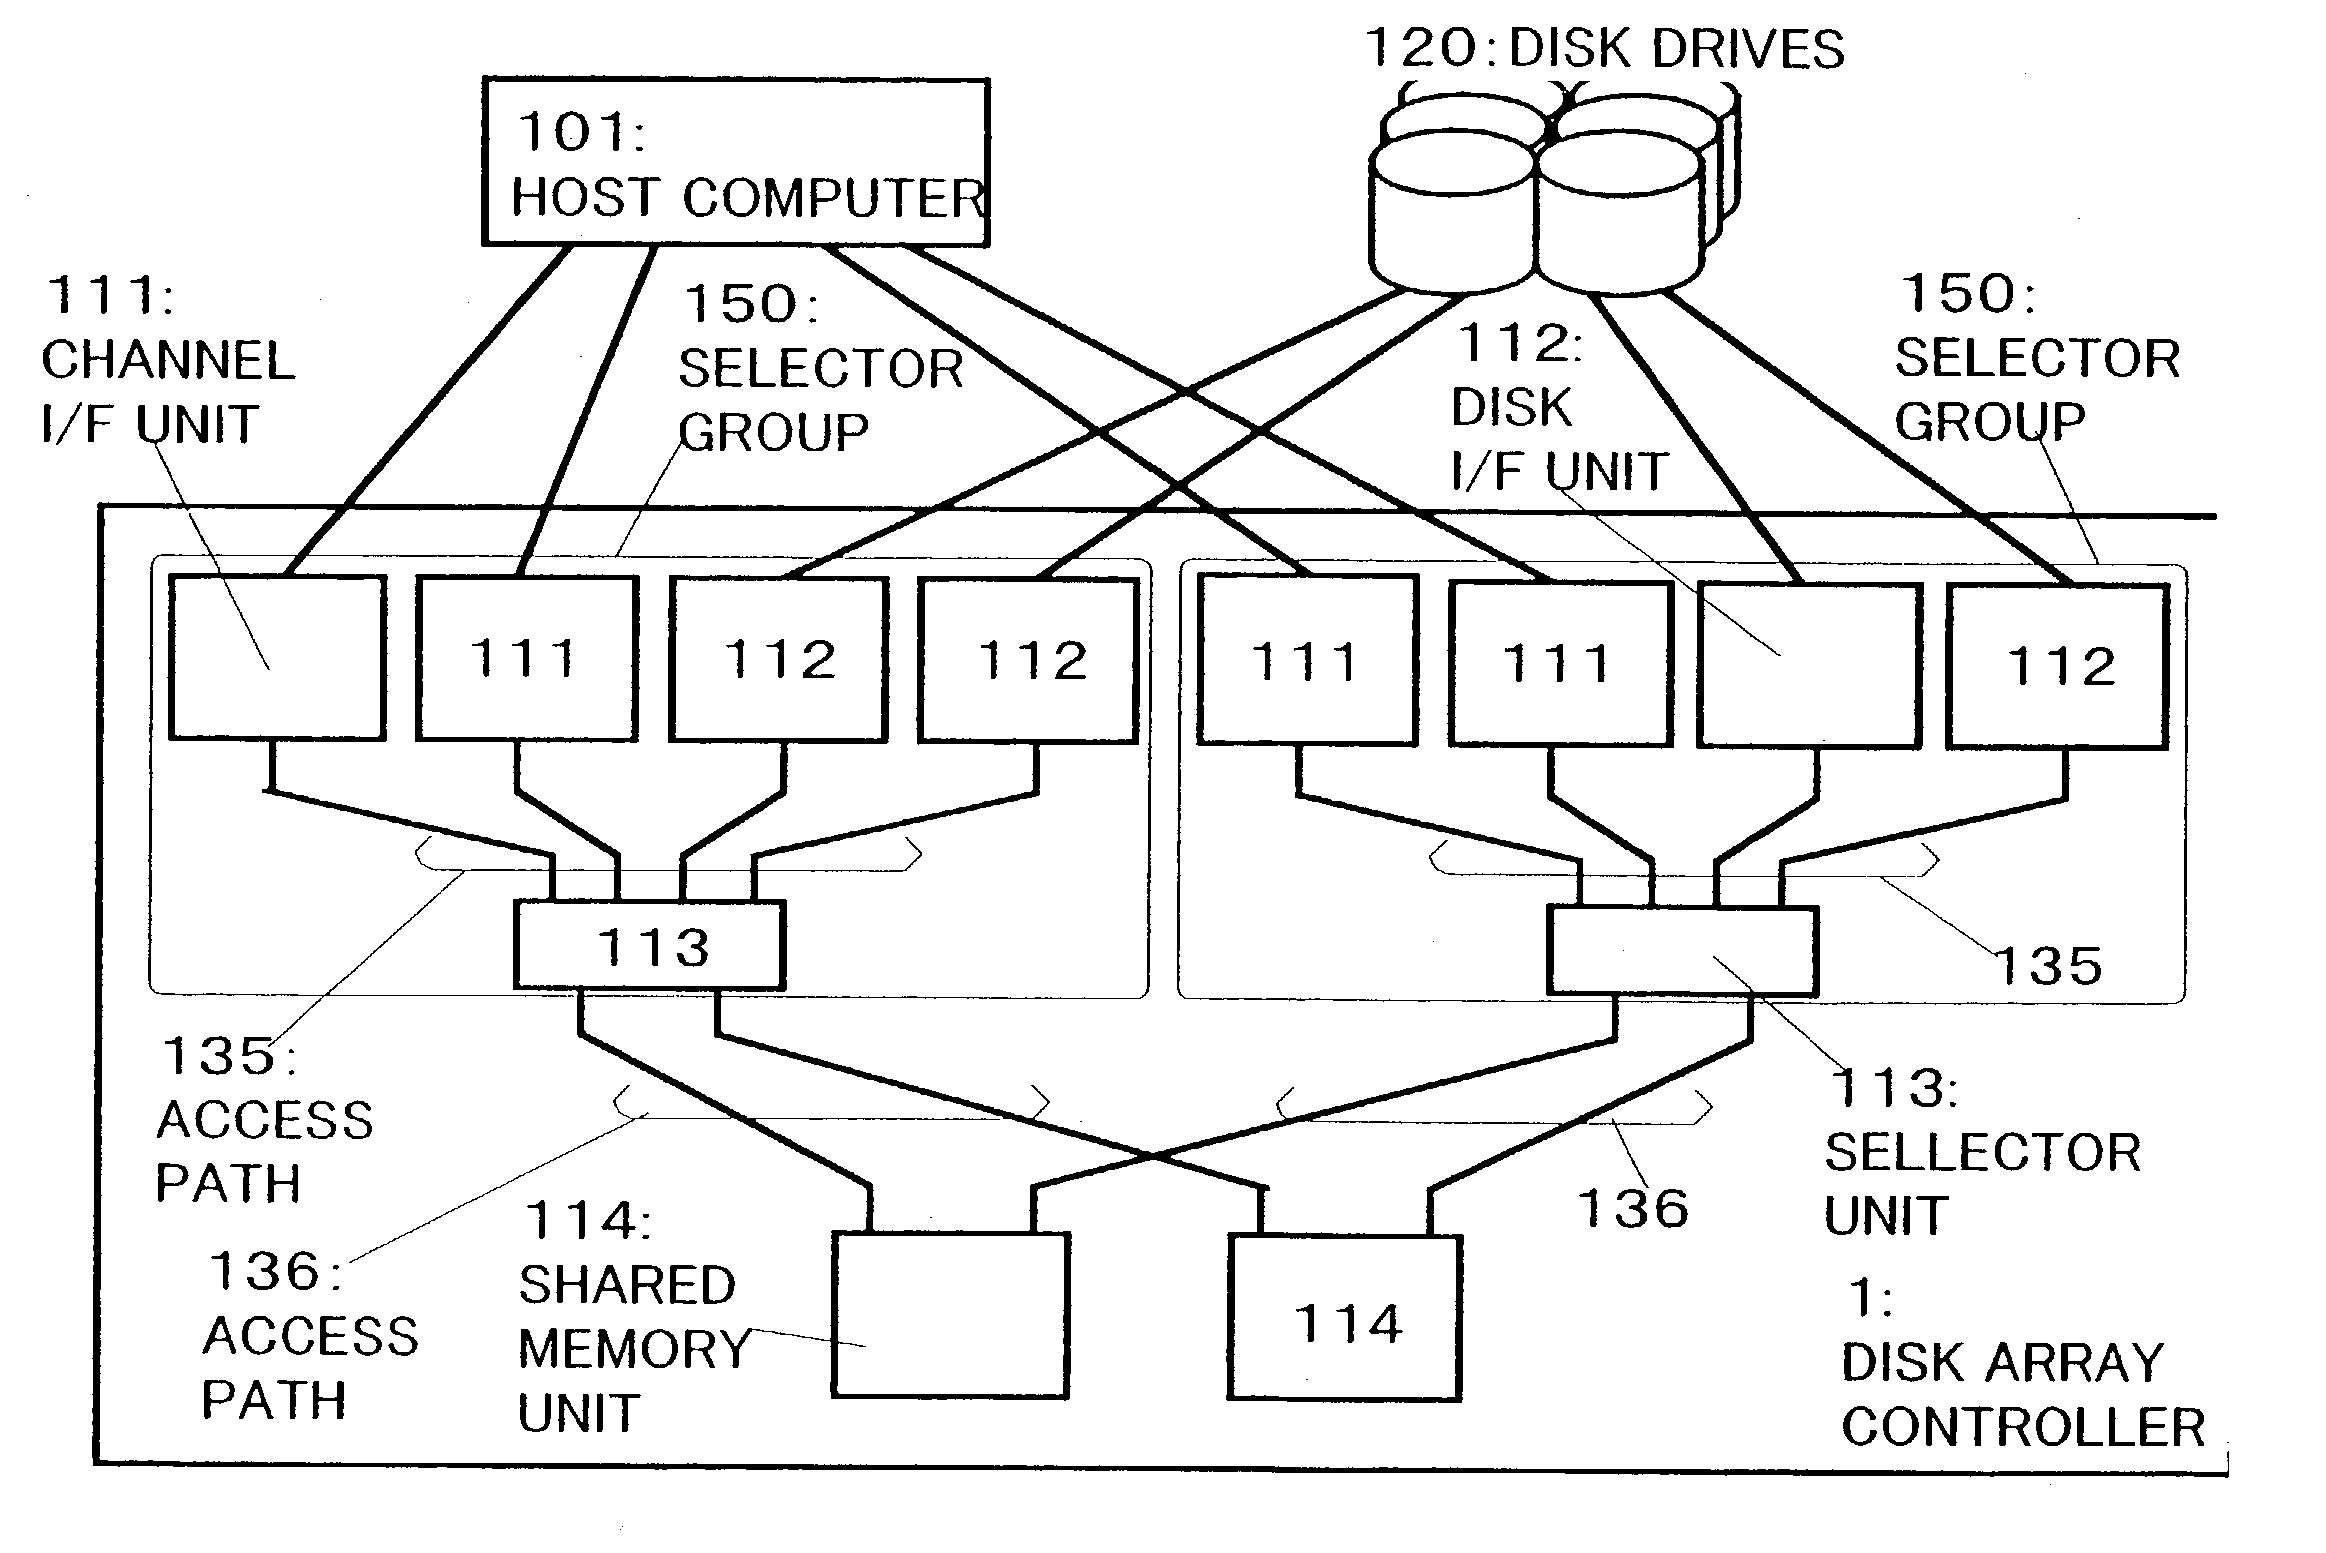 Disk array controller with connection path formed on connection request queue basis